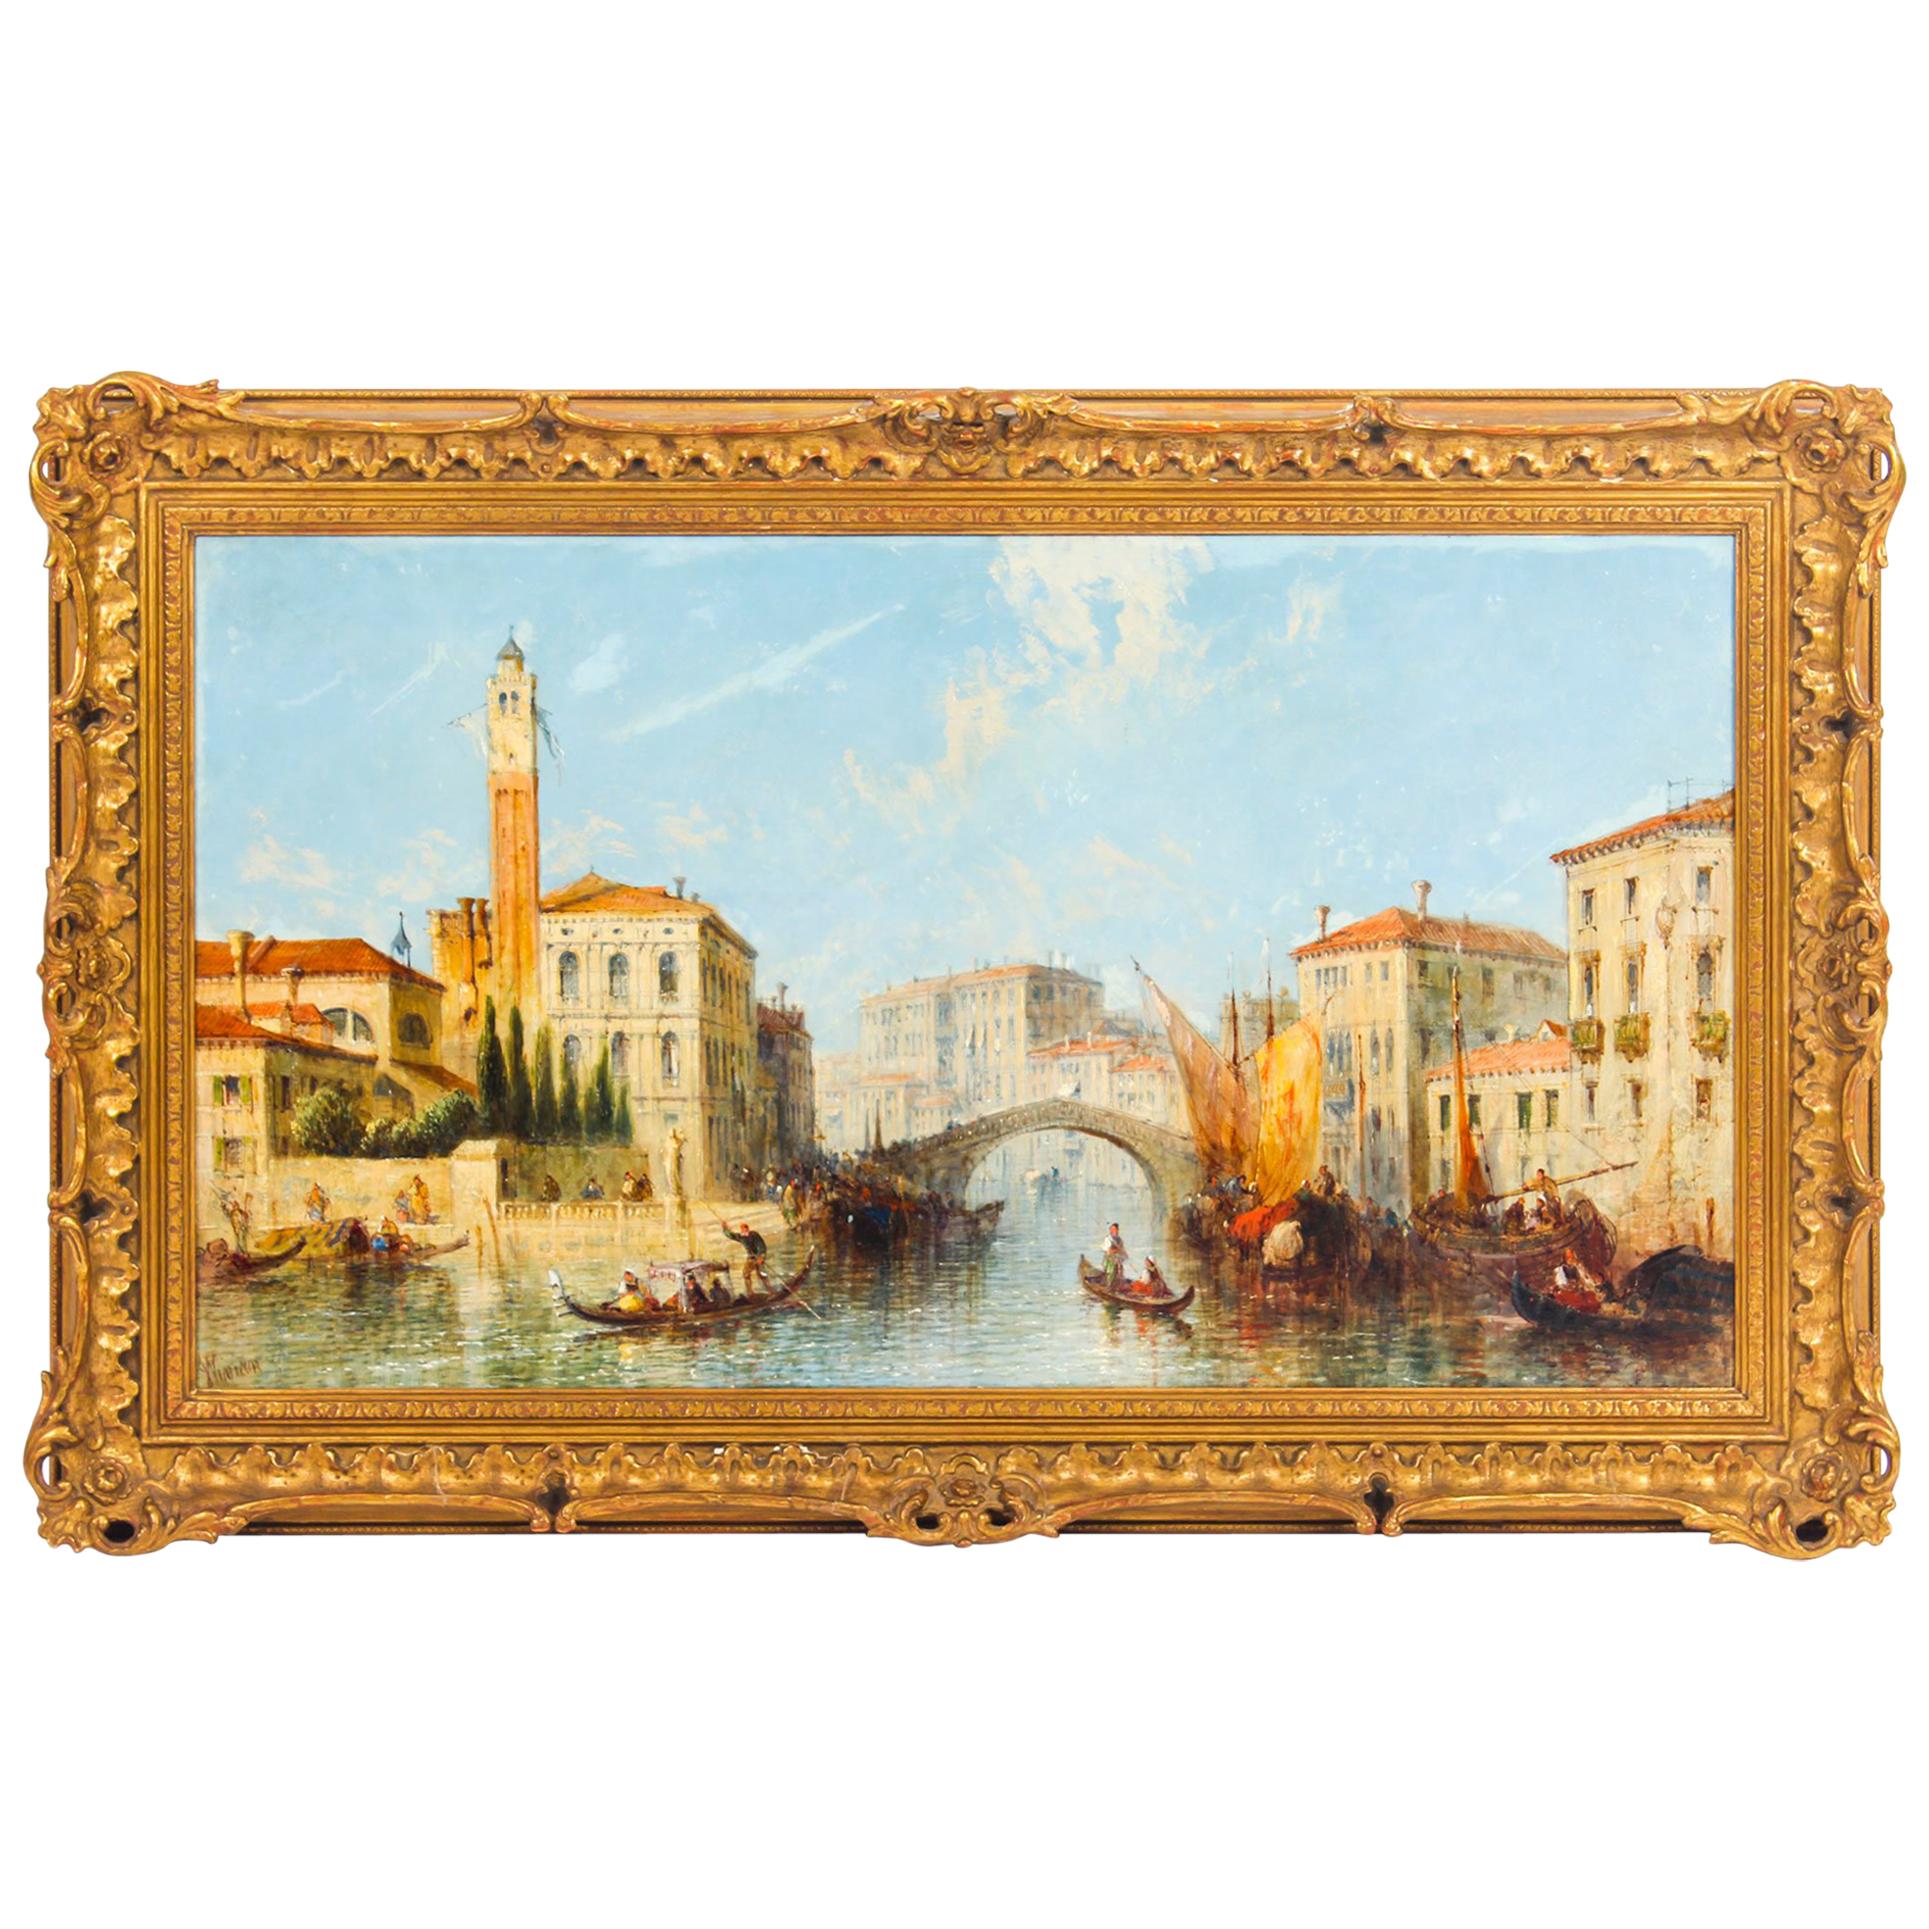 Antique Oil Painting Venetian Scene of The Grand Canal J.Vivian, 19th Century